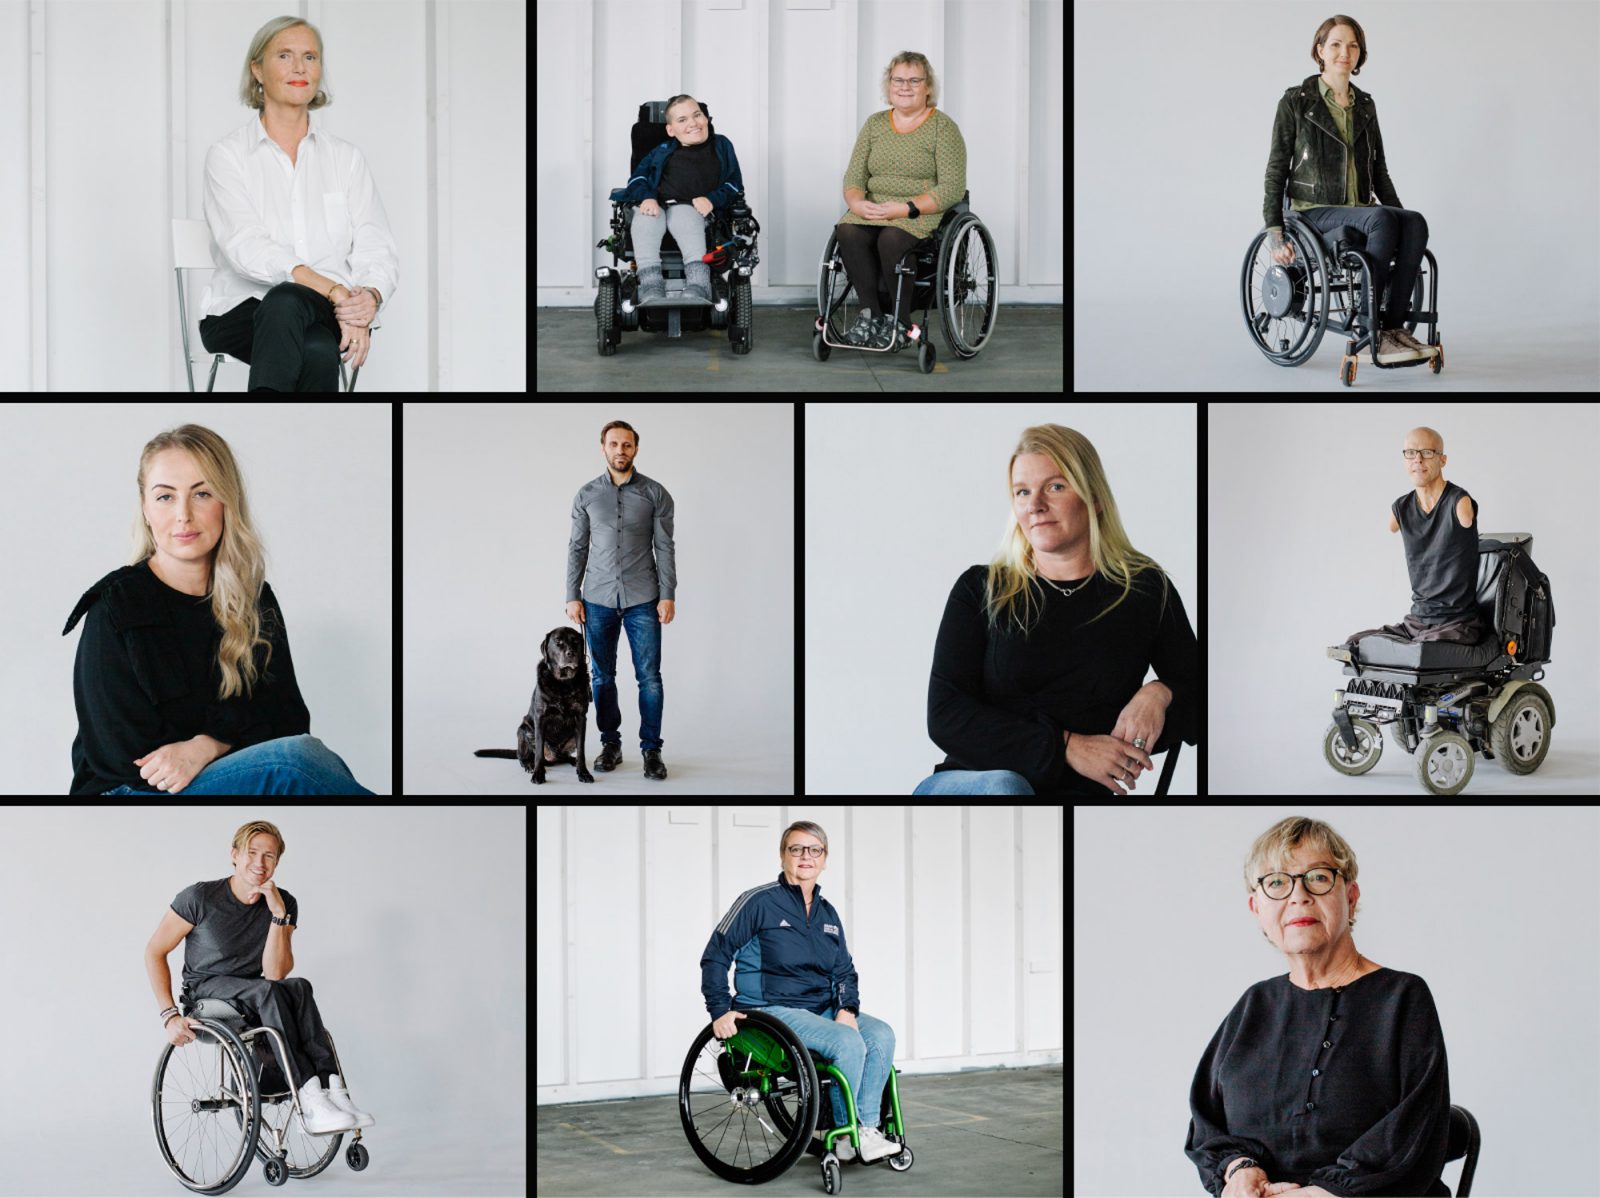 Eleven people in wheelchairs or otherwise disabled who participated in an IKEA design project regarding inclusive design.